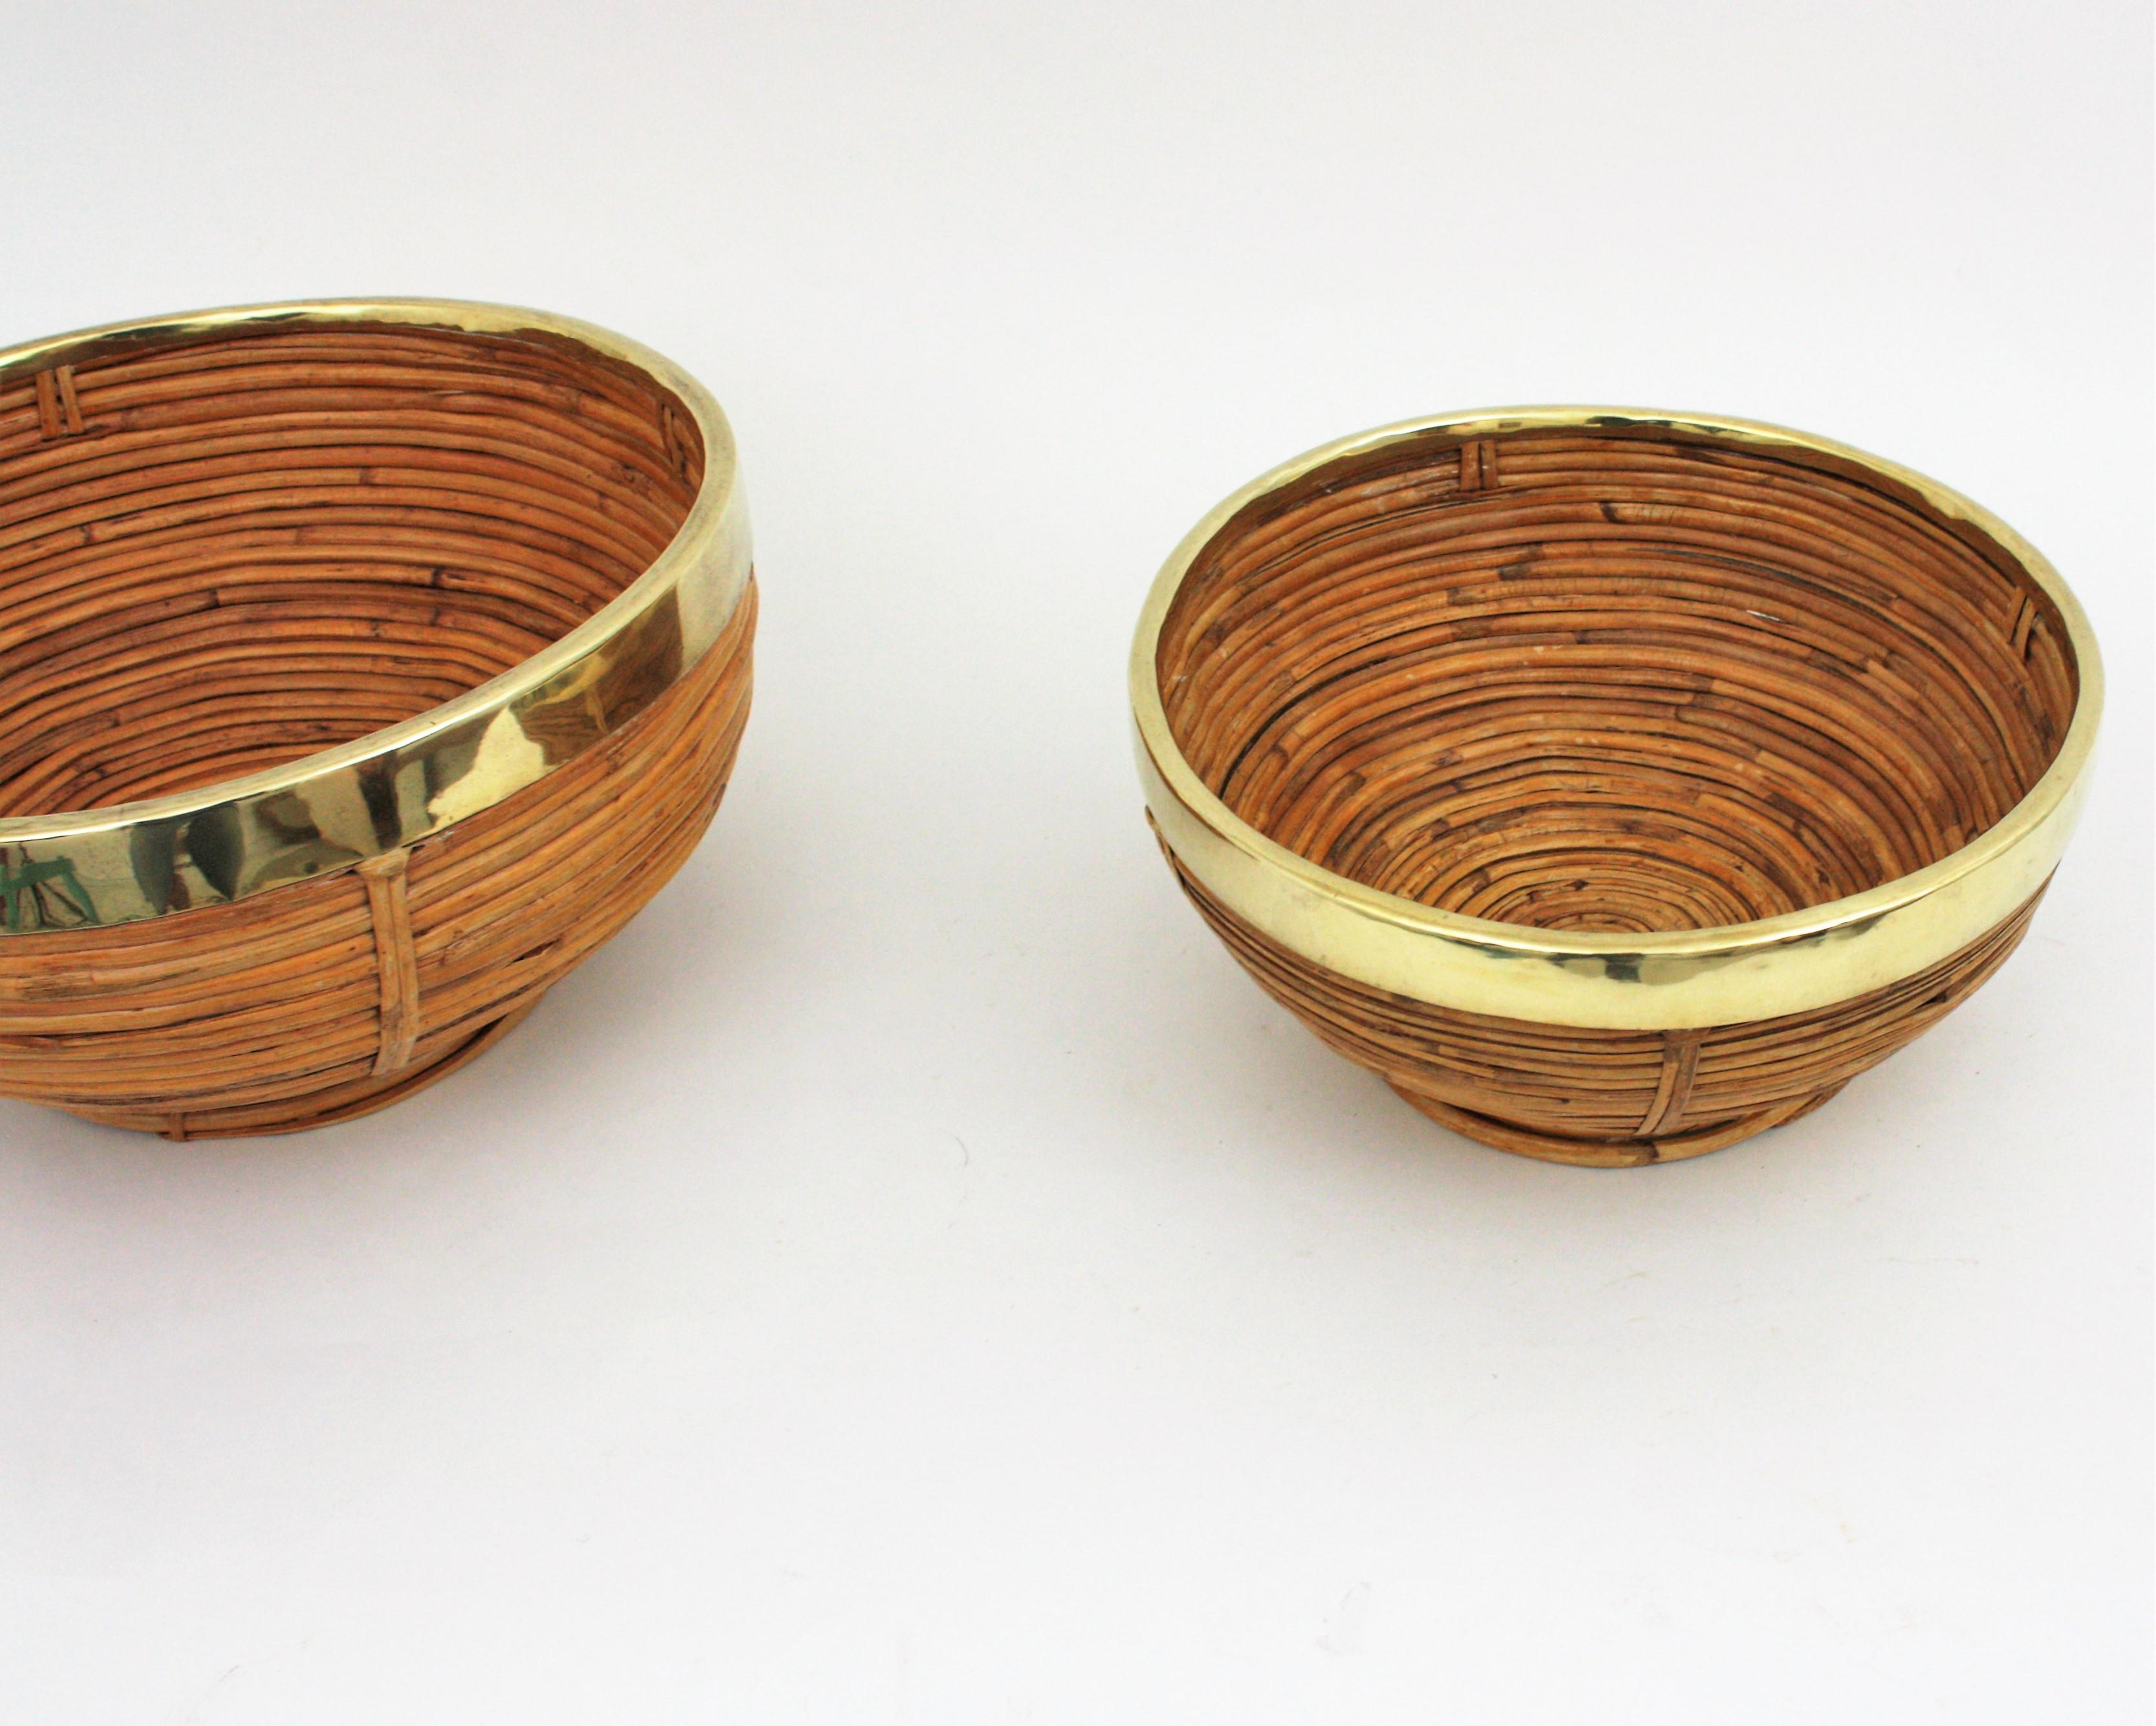 Rattan and Brass Basket Centerpiece Bowl, Italy, 1970s For Sale 4